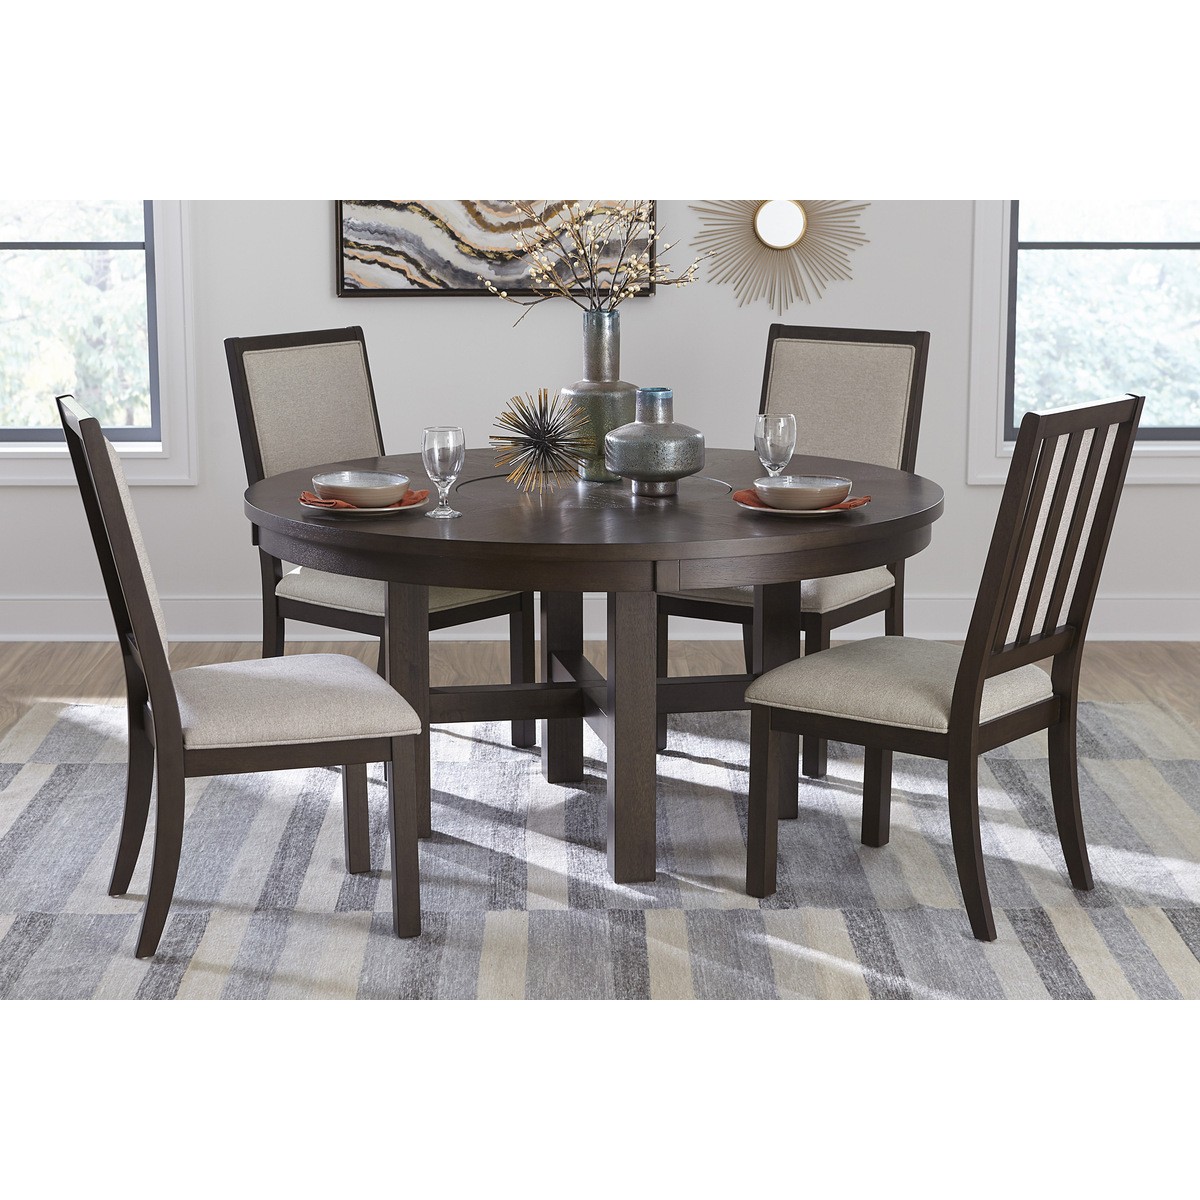 5718 60 round dining table with lazy susan